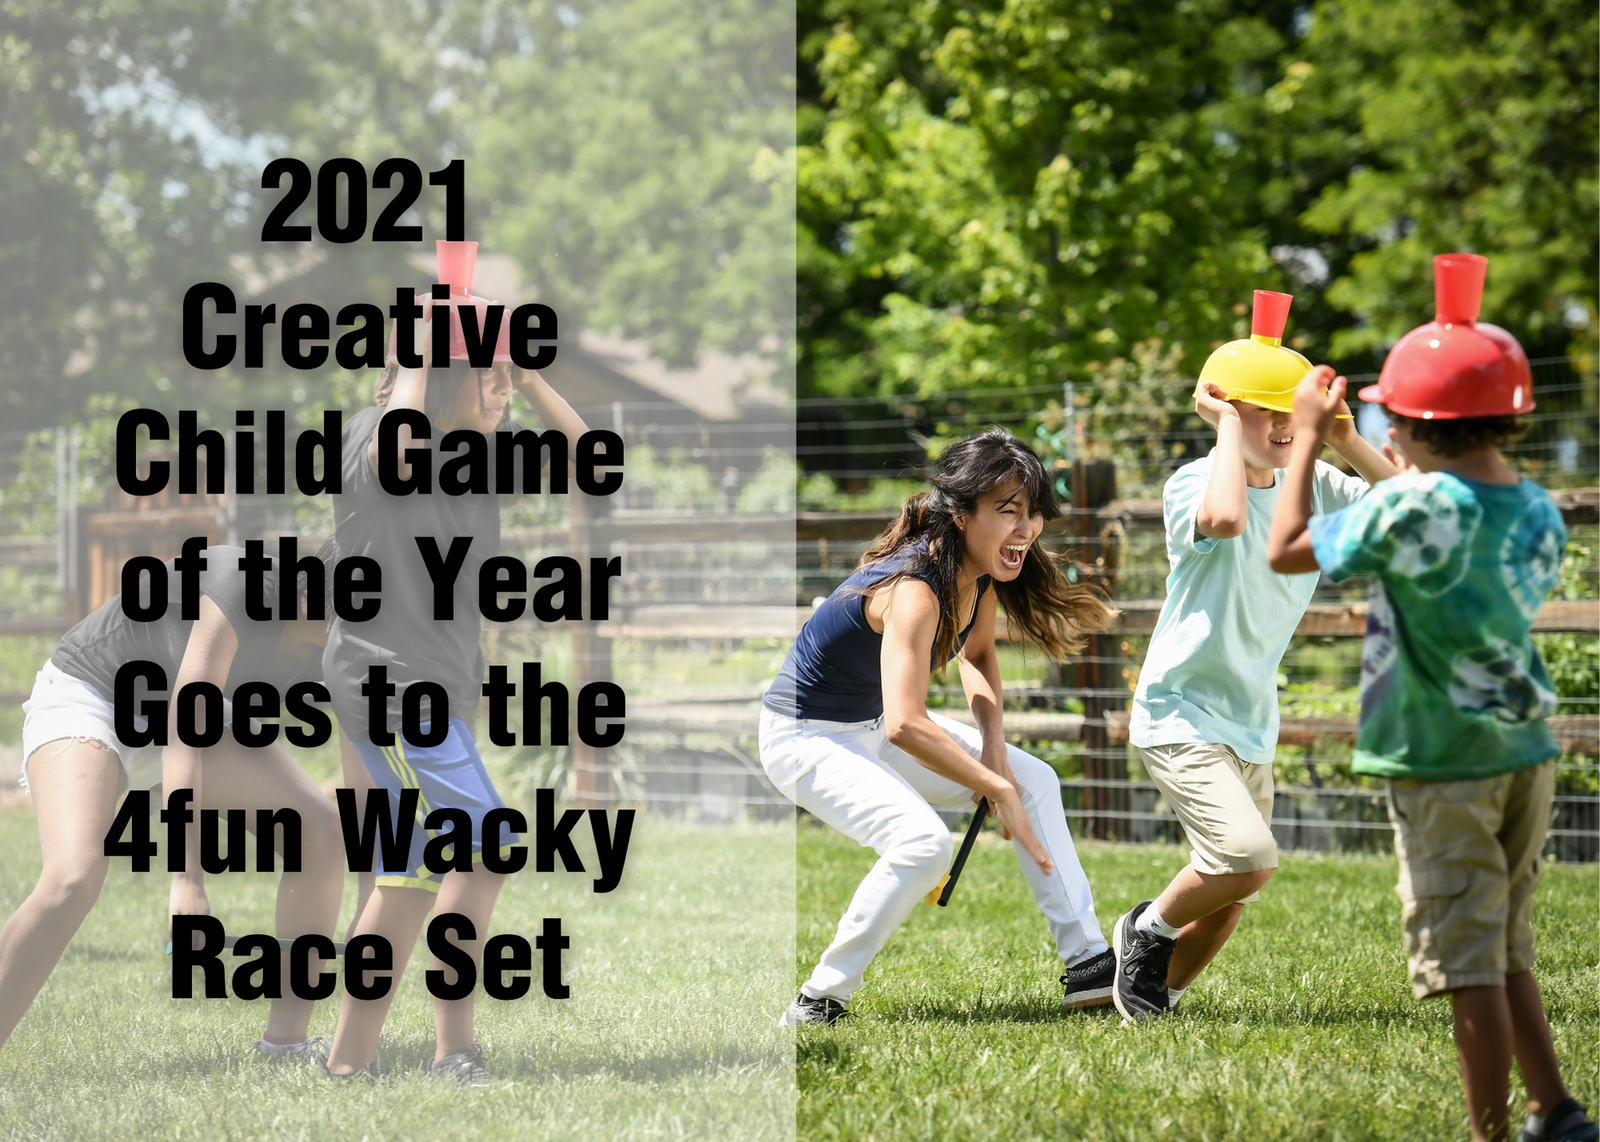 2021 Creative Child Game of the Year Goes to the 4fun Wacky Race Set